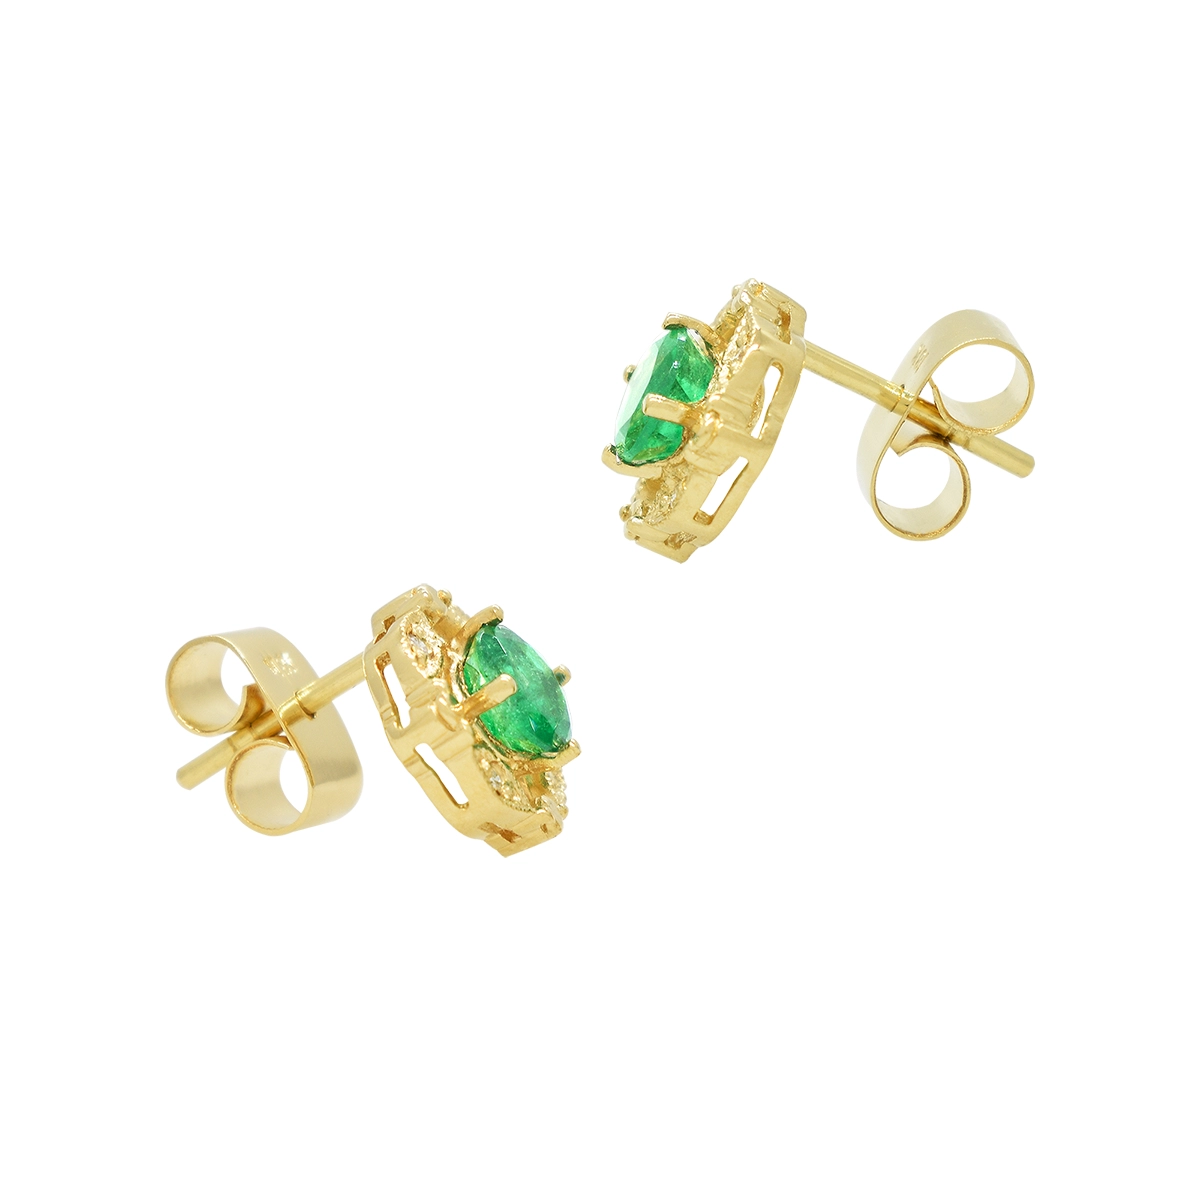 These earrings have durable push-backs butterflies handcrafted especially for this set of emerald and diamond earrings